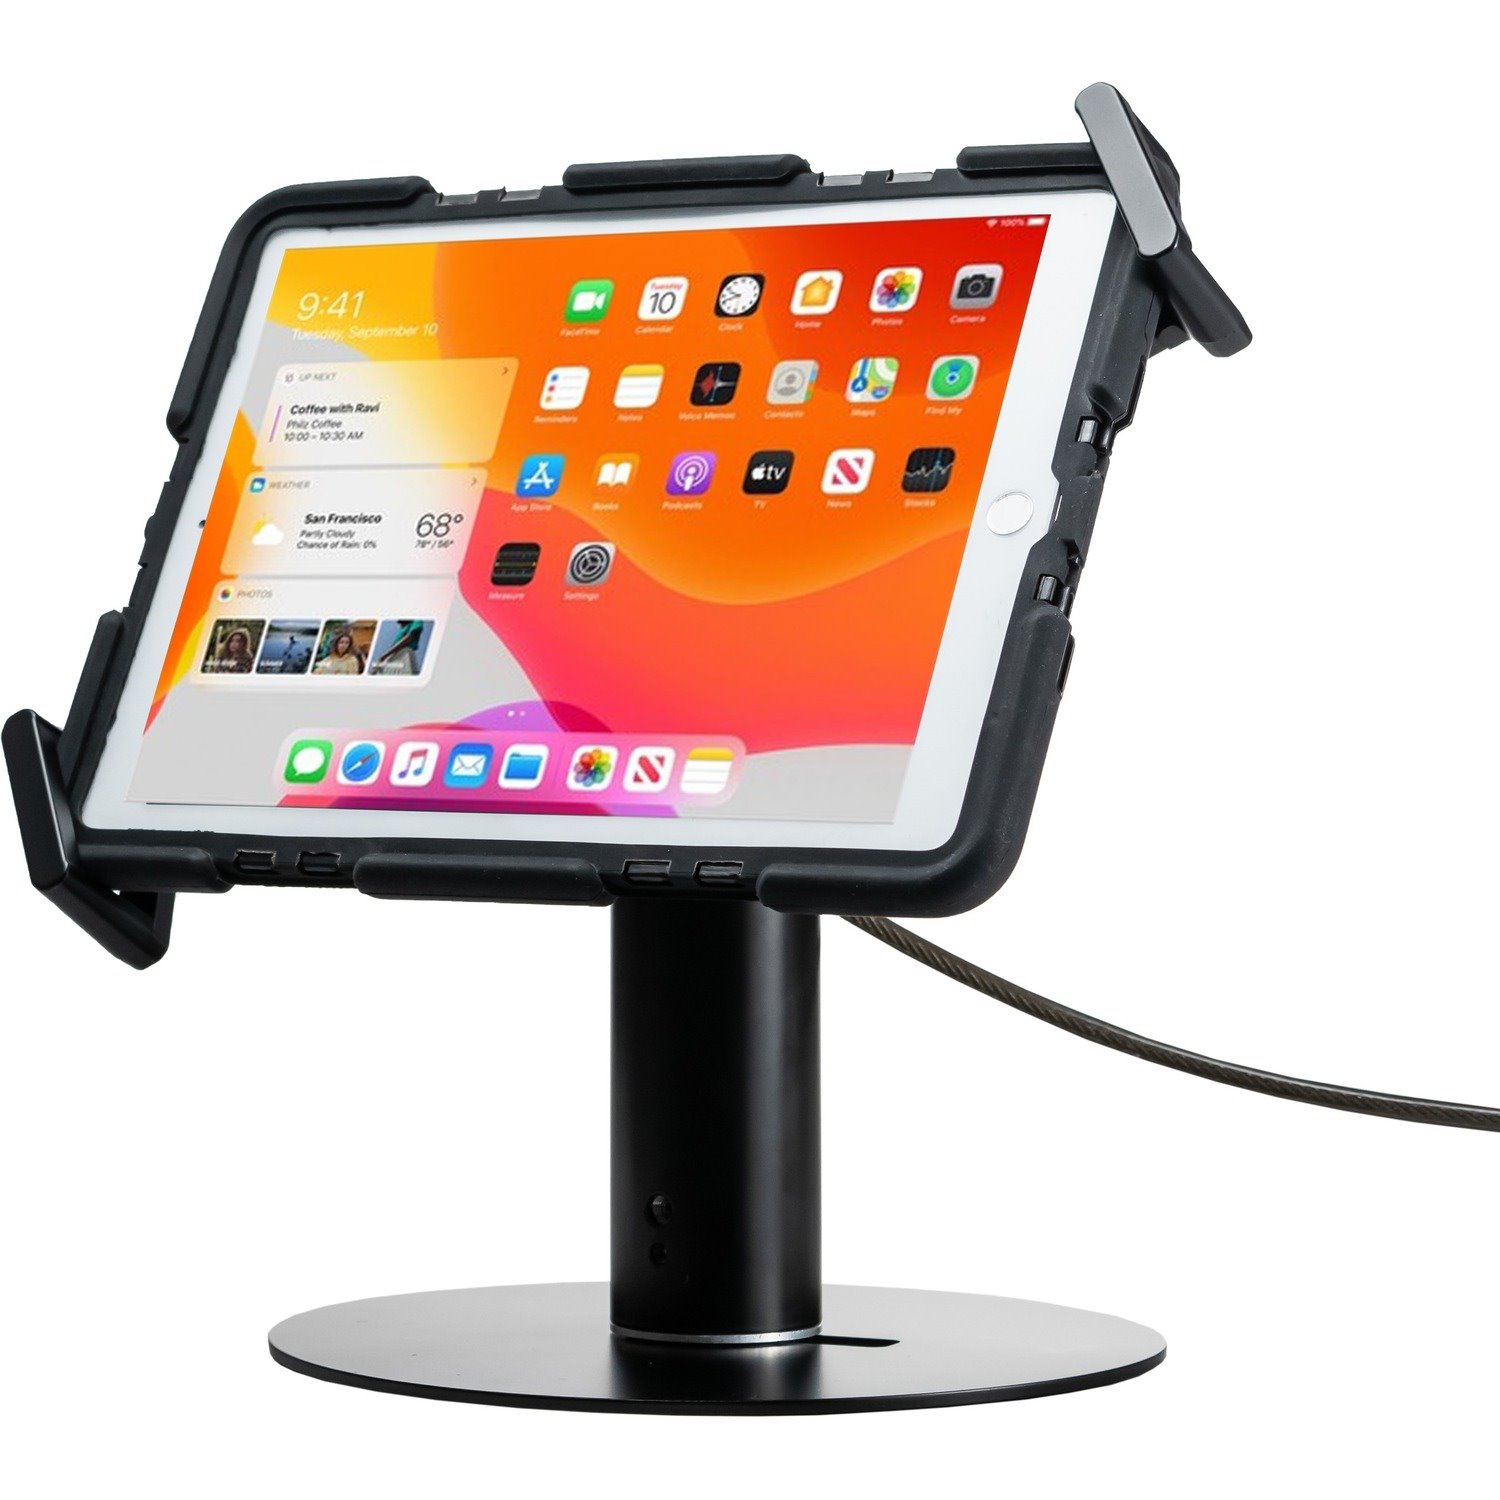 CTA Digital Universal Security Grip Kiosk Stand for Tablets